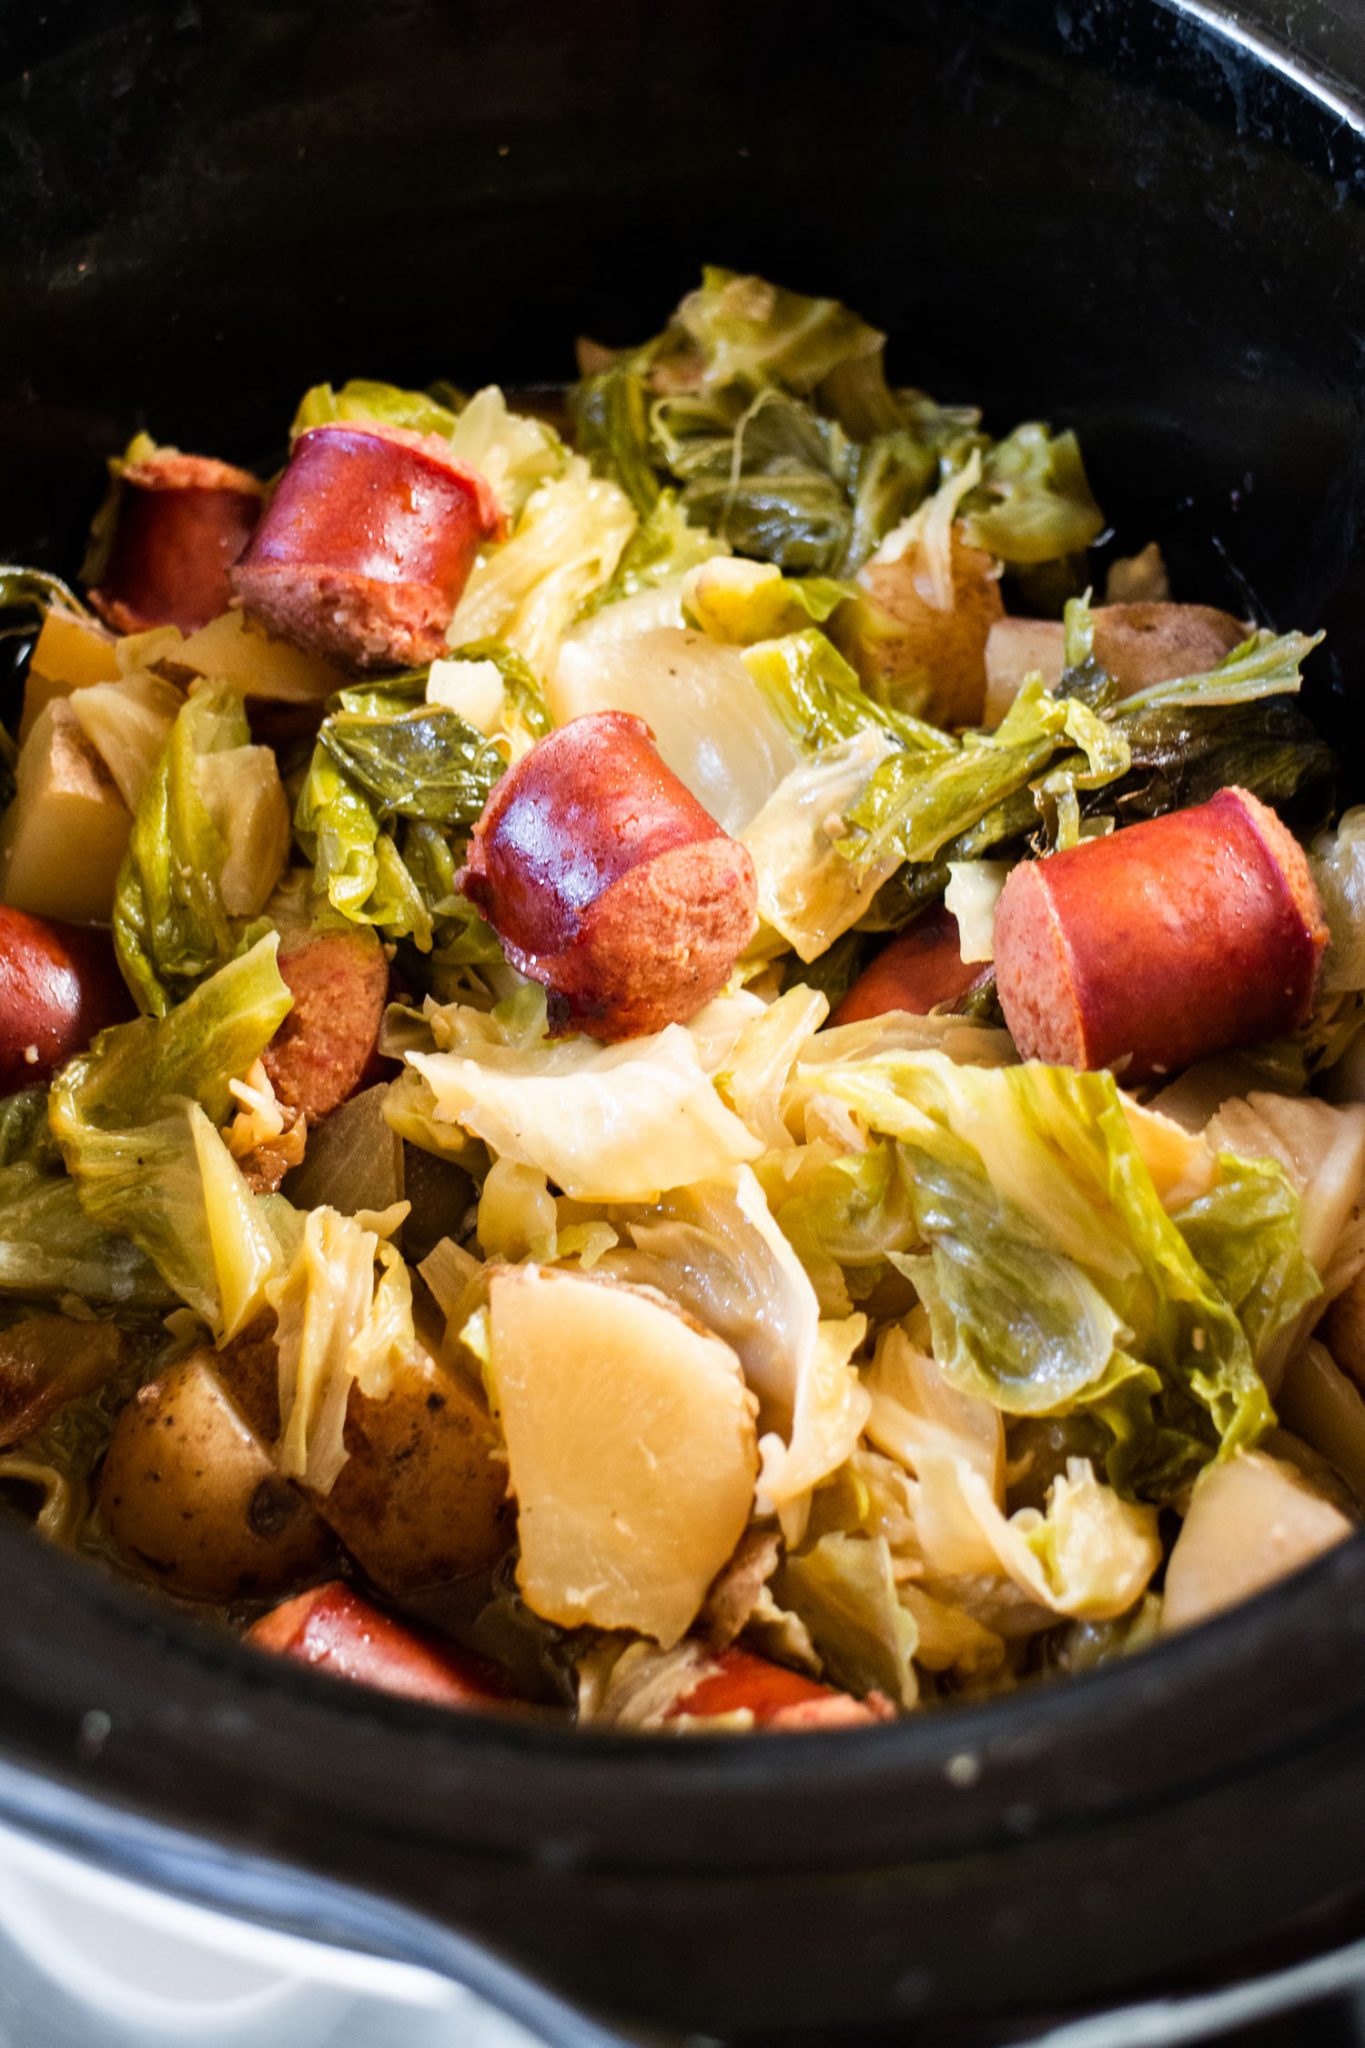 Slow Cooker Kielbasa and Cabbage Recipe - Easy Crockpot Meal!